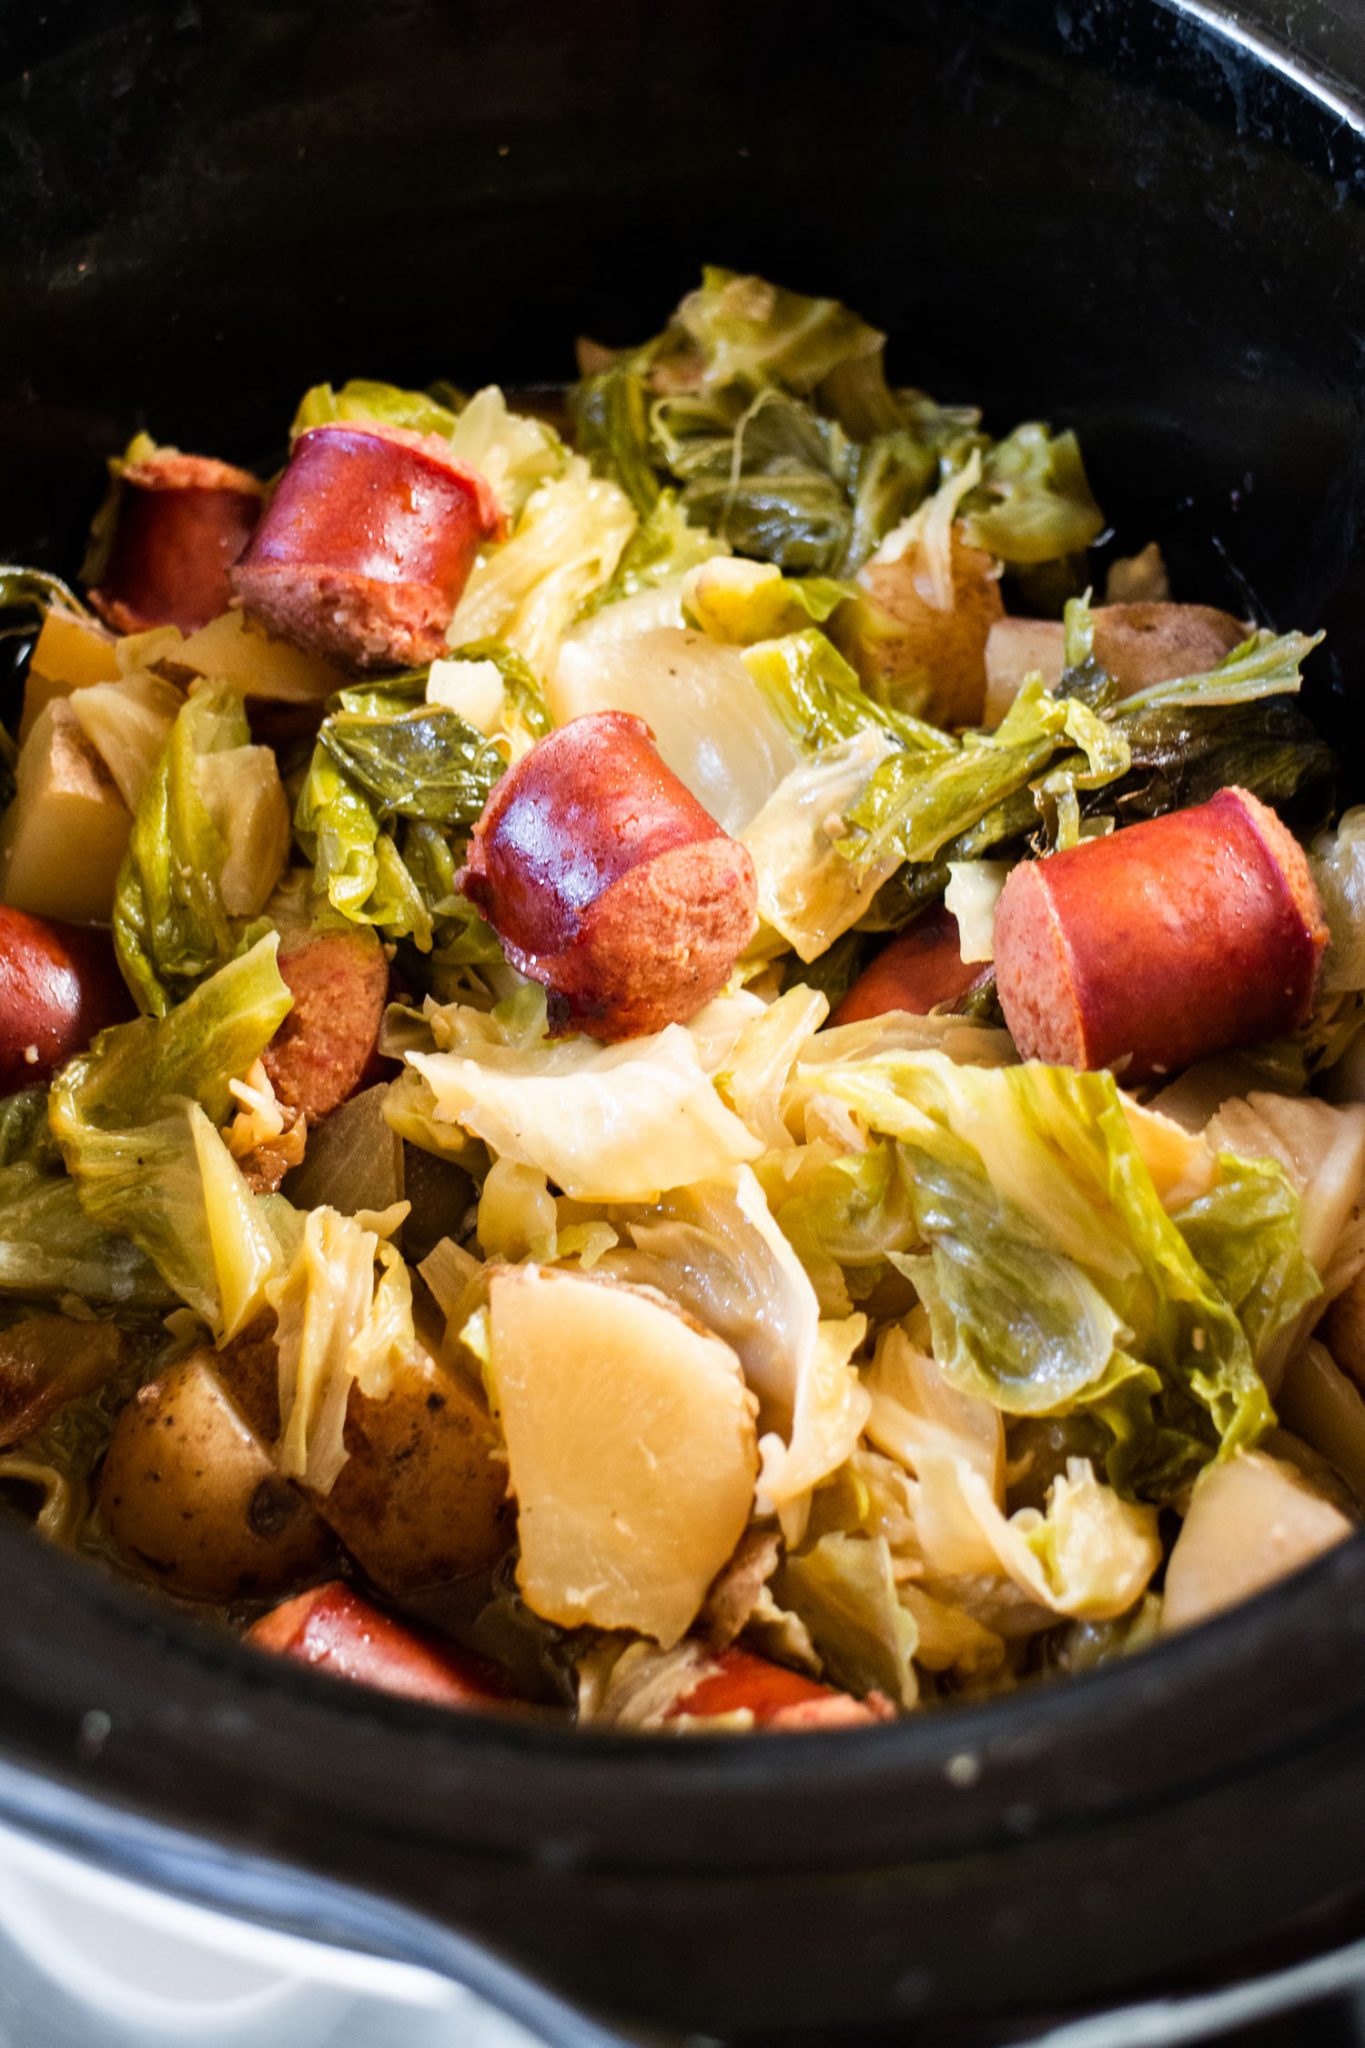 Slow Cooker Kielbasa and Cabbage Recipe - Easy Crockpot Meal!